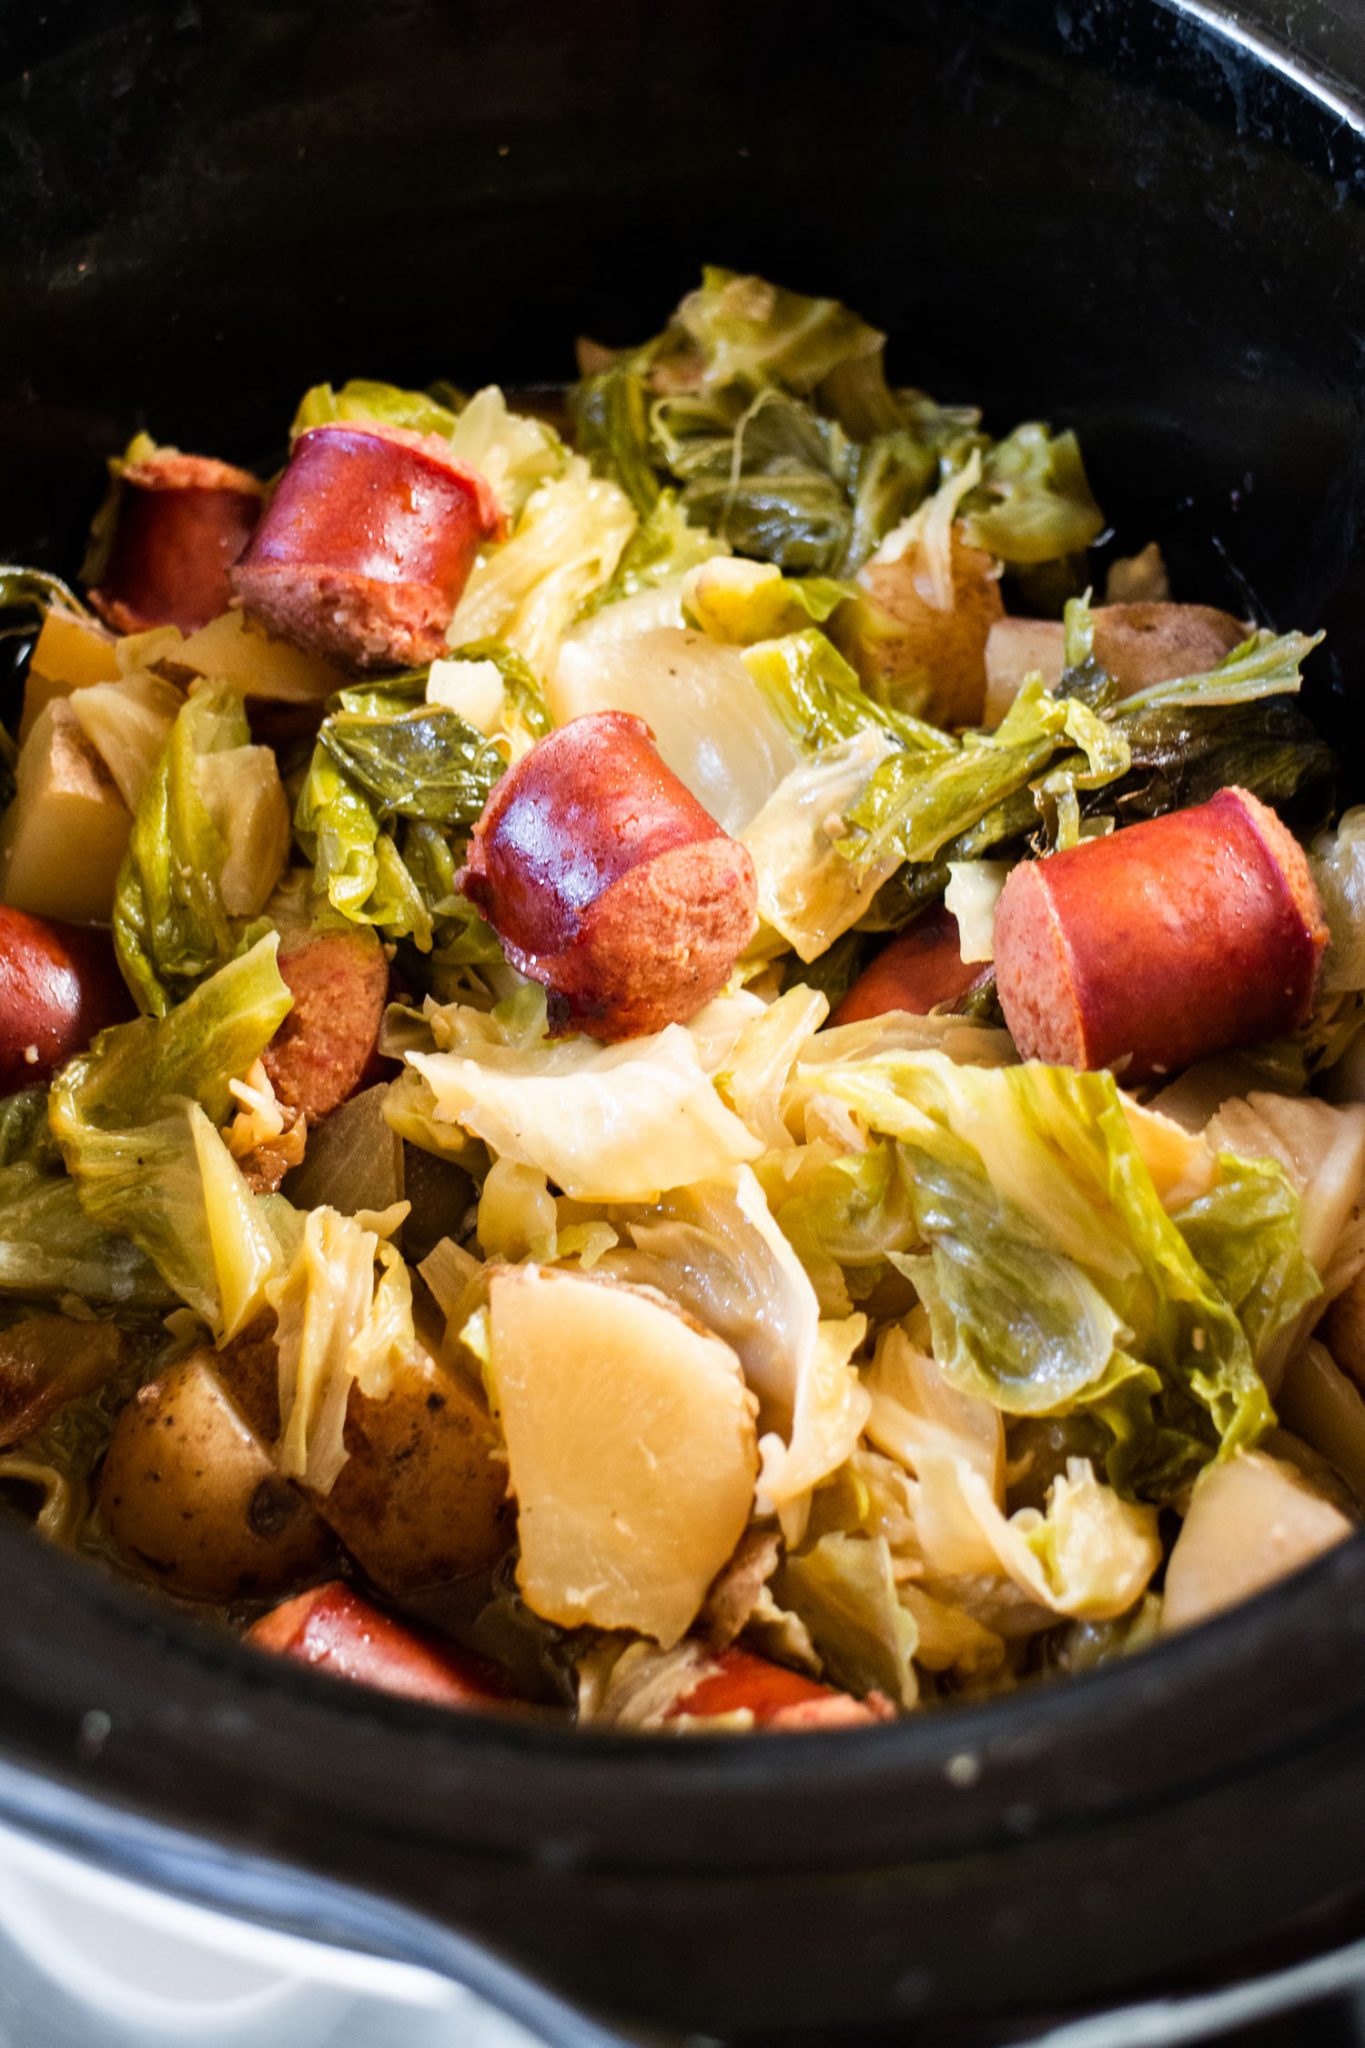 Slow Cooker Kielbasa and Cabbage Recipe - Easy Crockpot Meal!